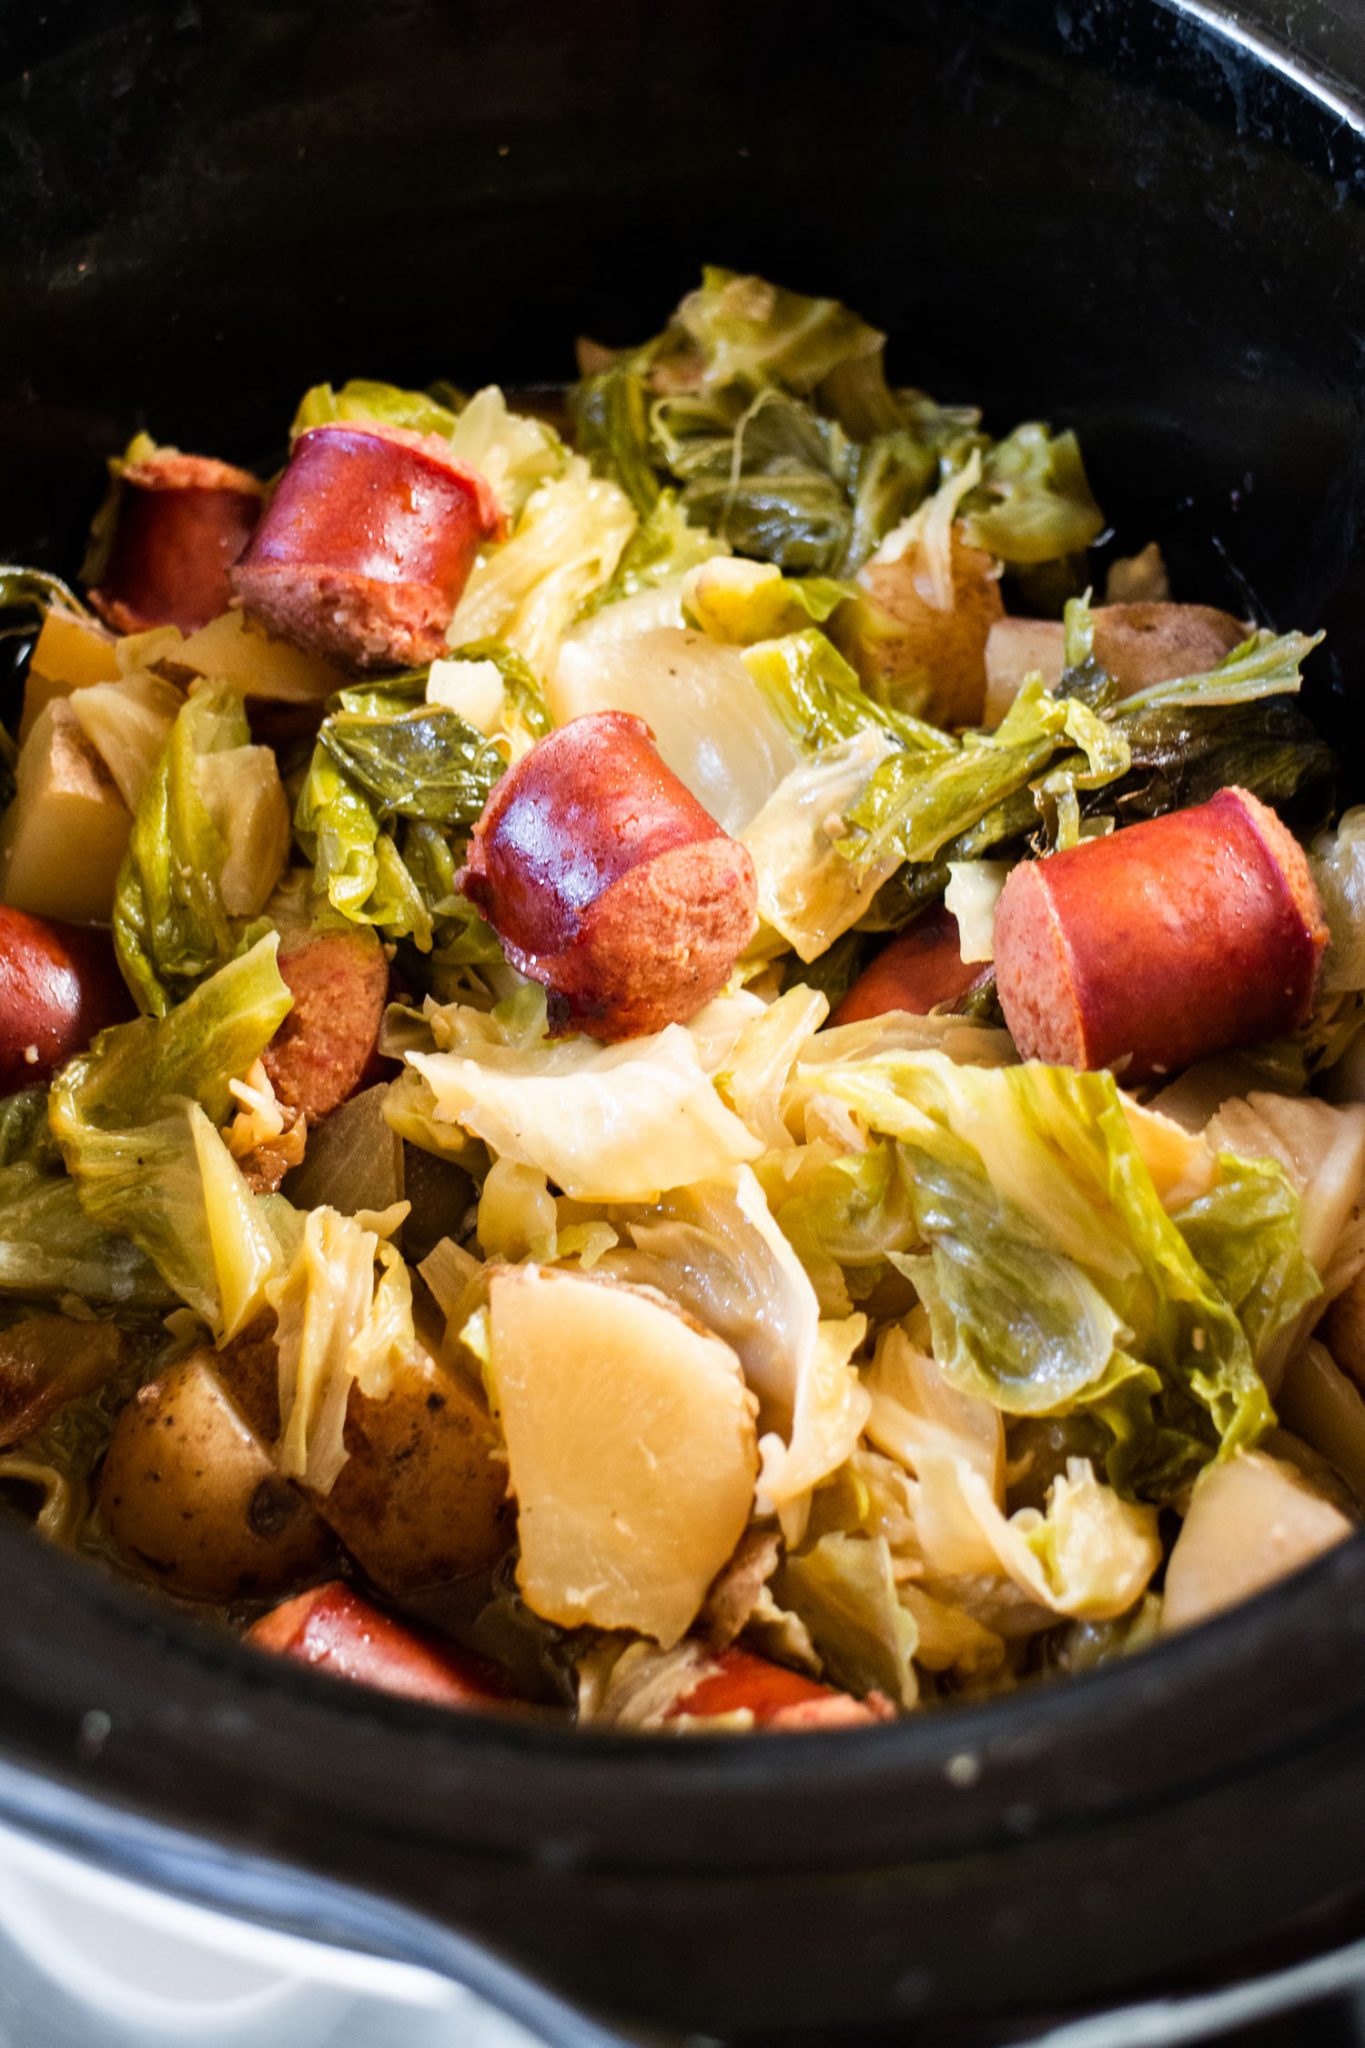 Slow Cooker Kielbasa and Cabbage Recipe - Easy Crockpot Meal!